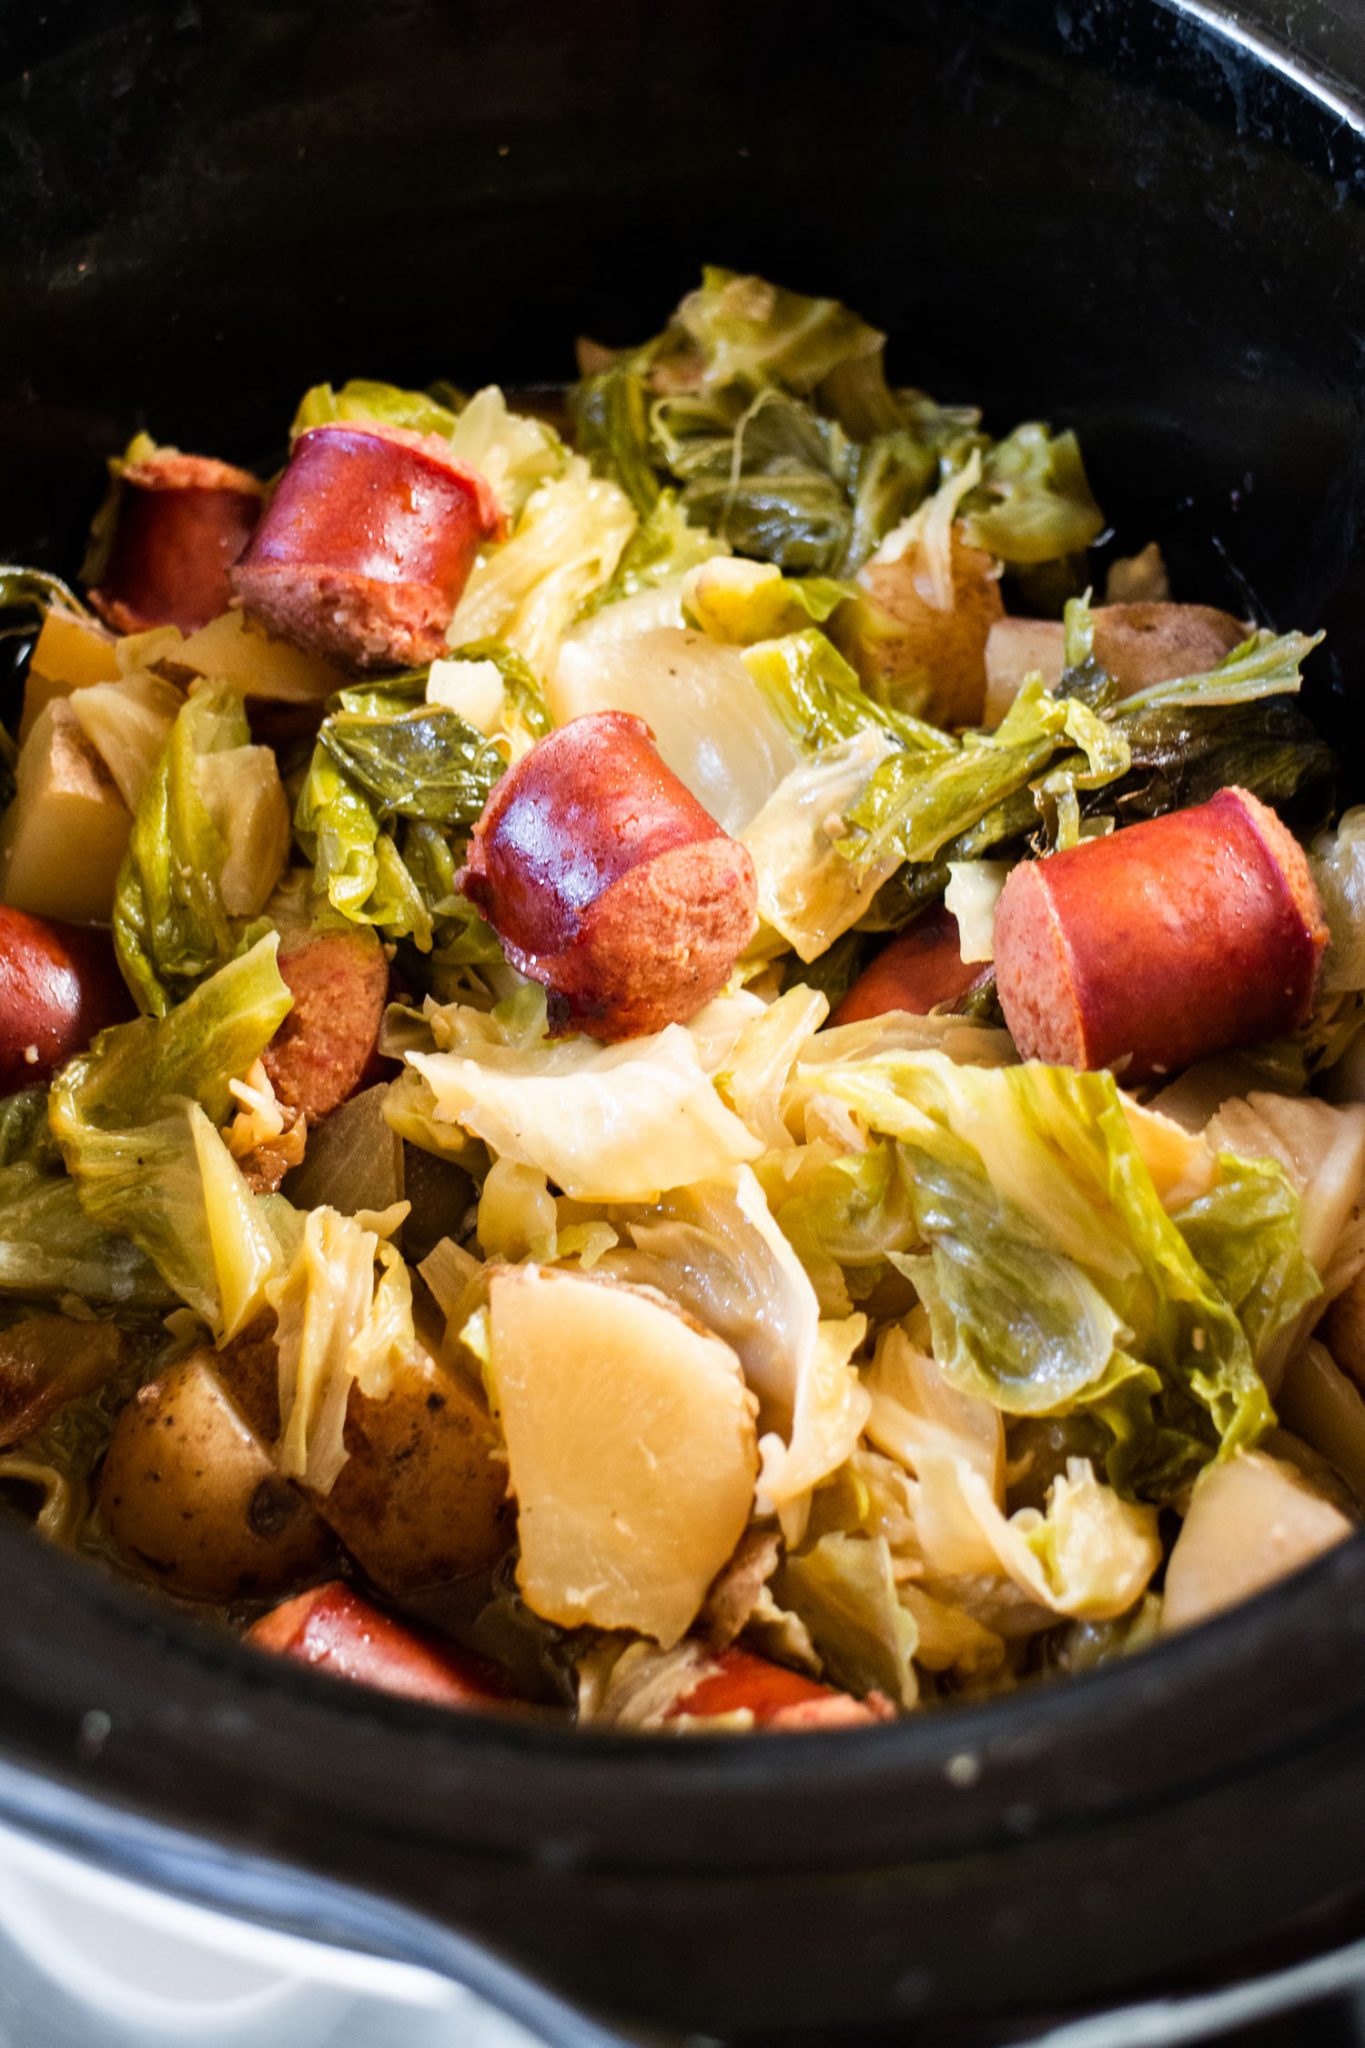 Slow Cooker Kielbasa and Cabbage Recipe - Easy Crockpot Meal!